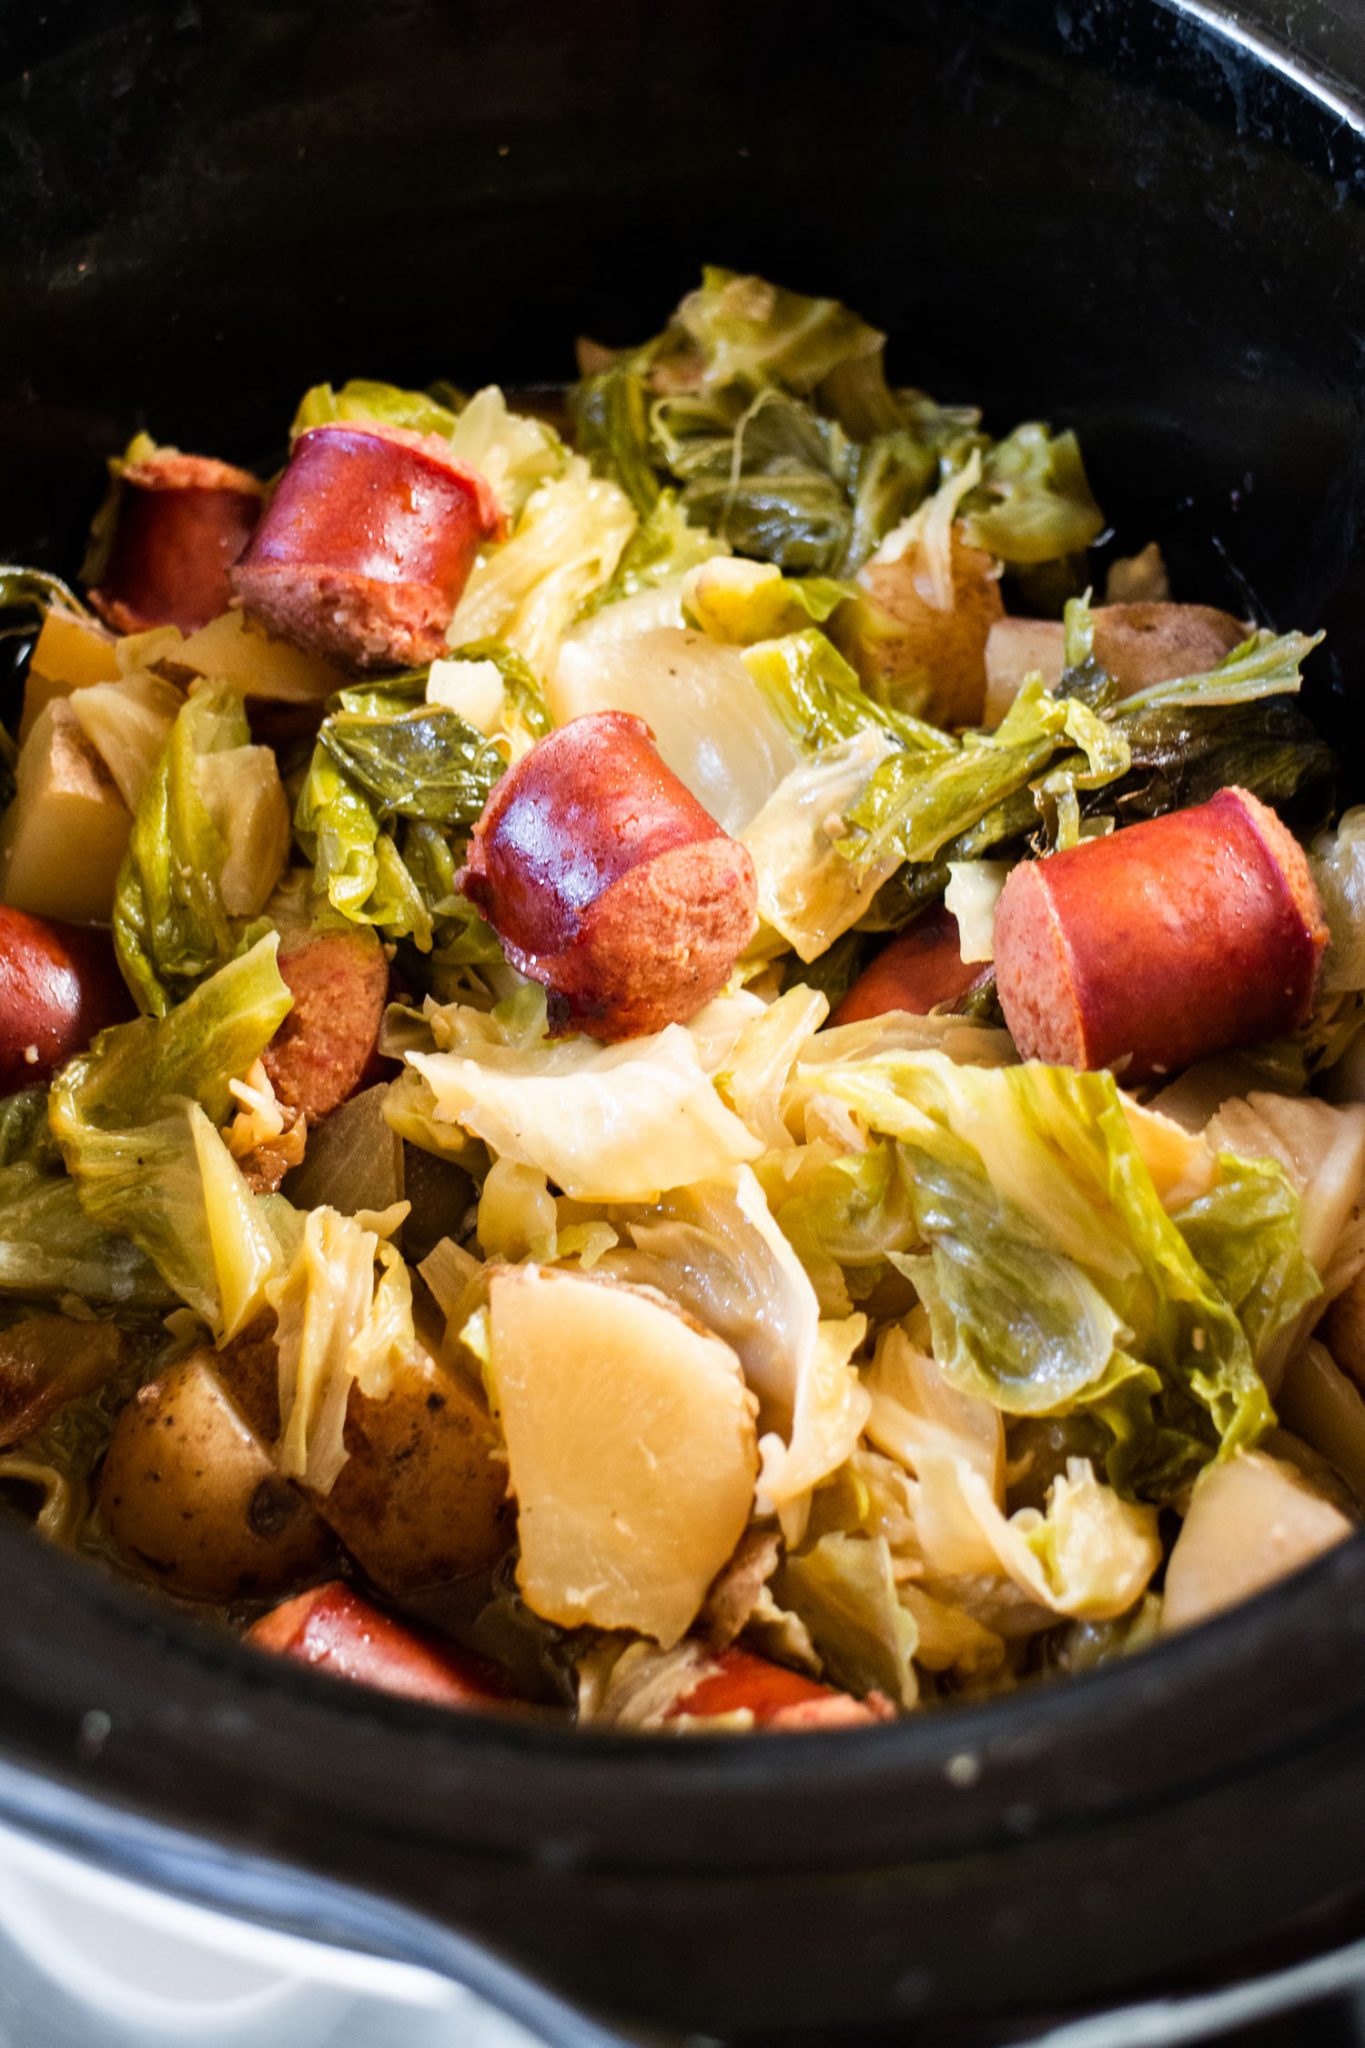 Slow Cooker Kielbasa and Cabbage Recipe - Easy Crockpot Meal!